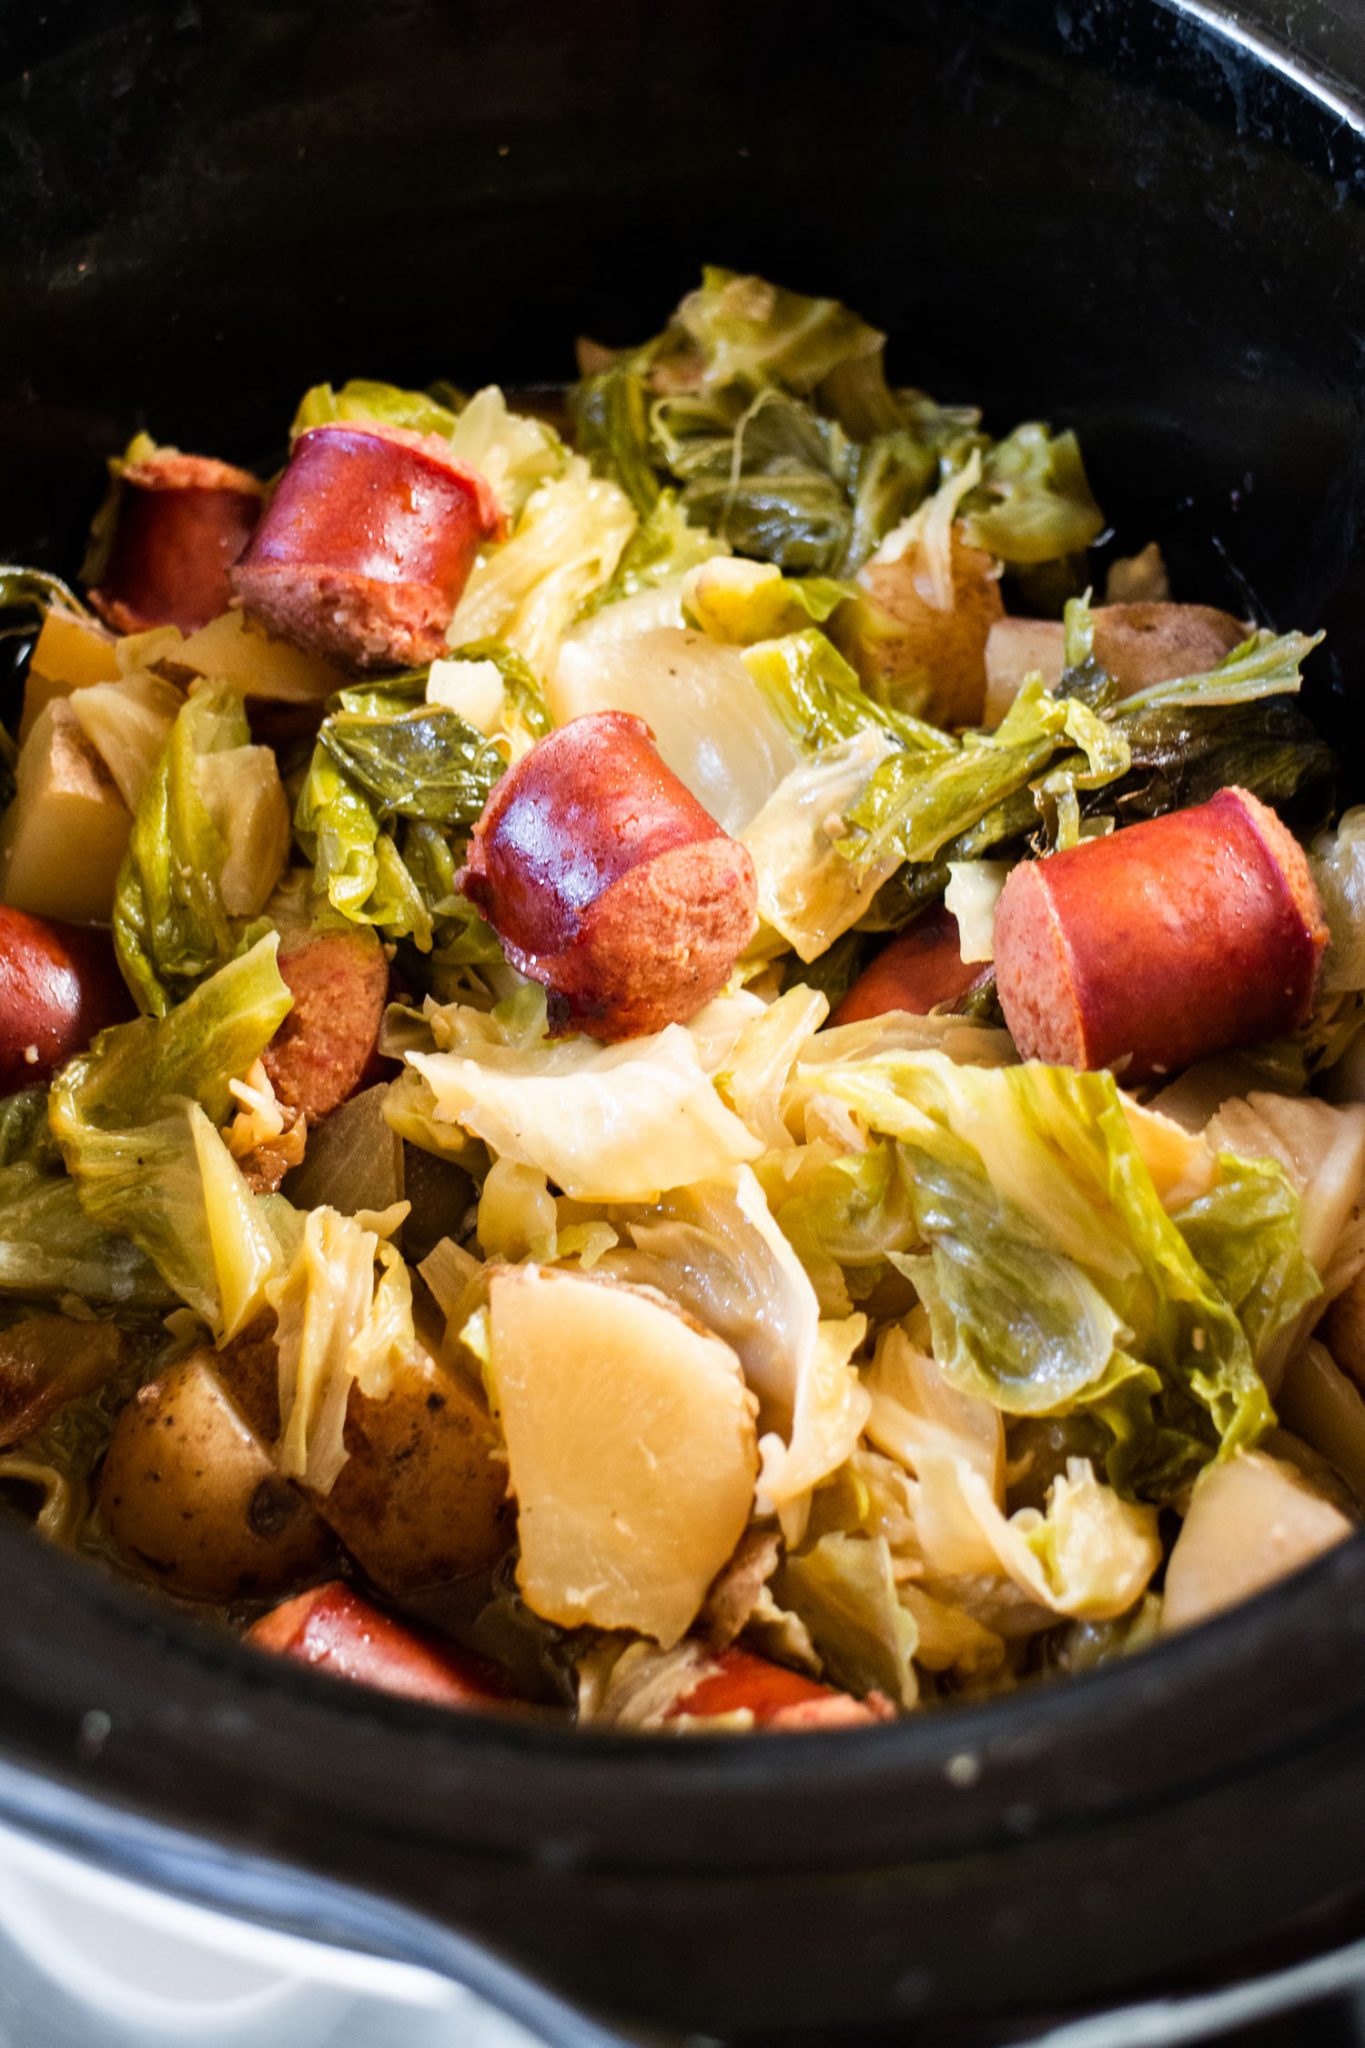 Slow Cooker Kielbasa and Cabbage Recipe - Easy Crockpot Meal!